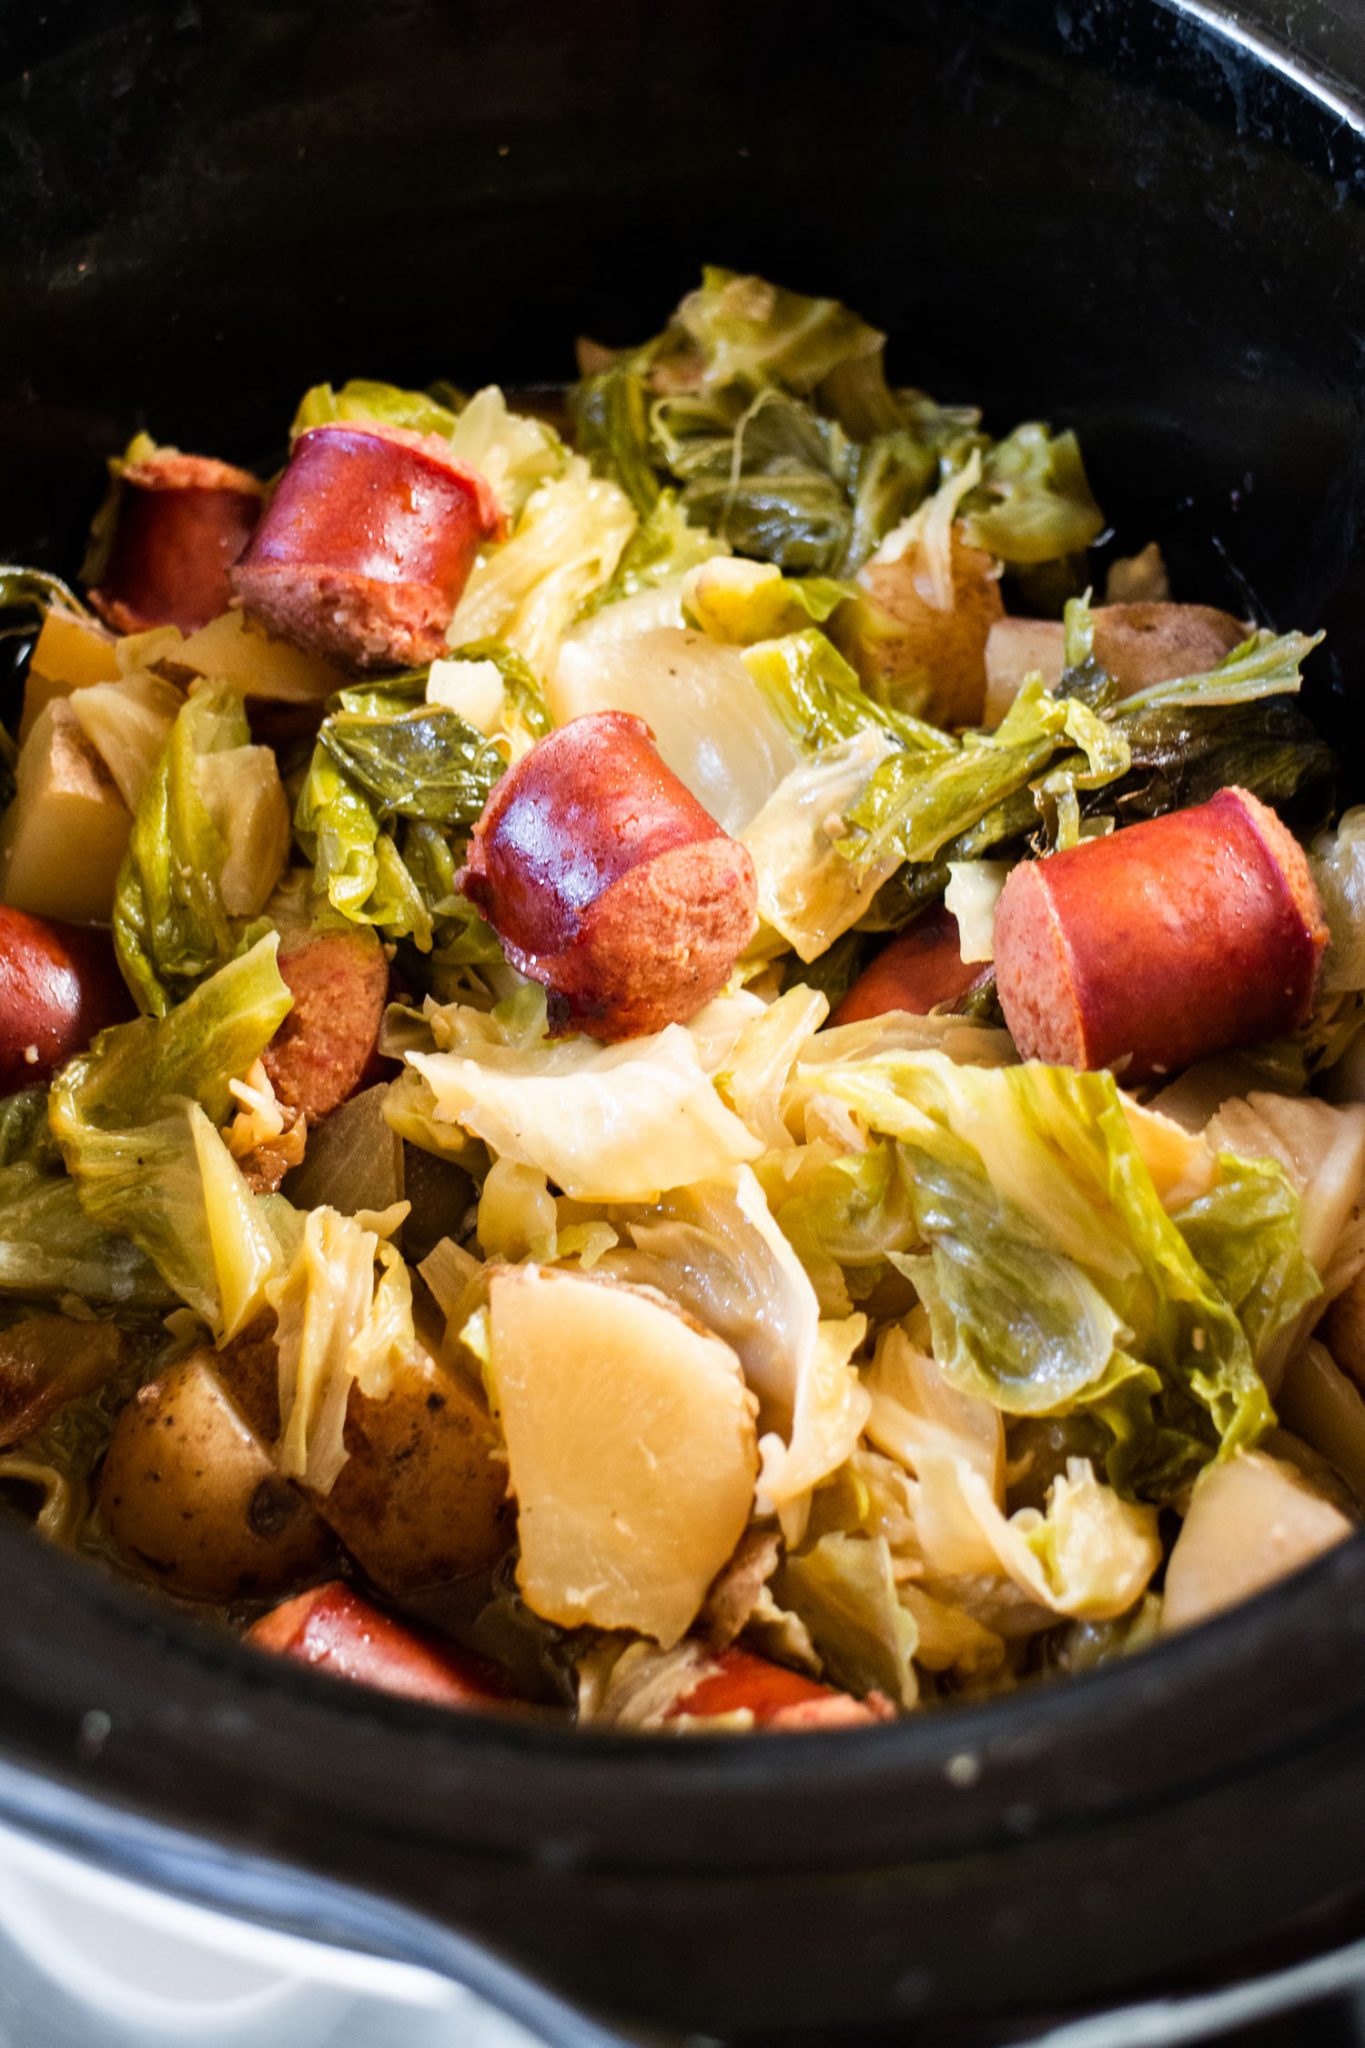 Slow Cooker Kielbasa and Cabbage Recipe - Easy Crockpot Meal!